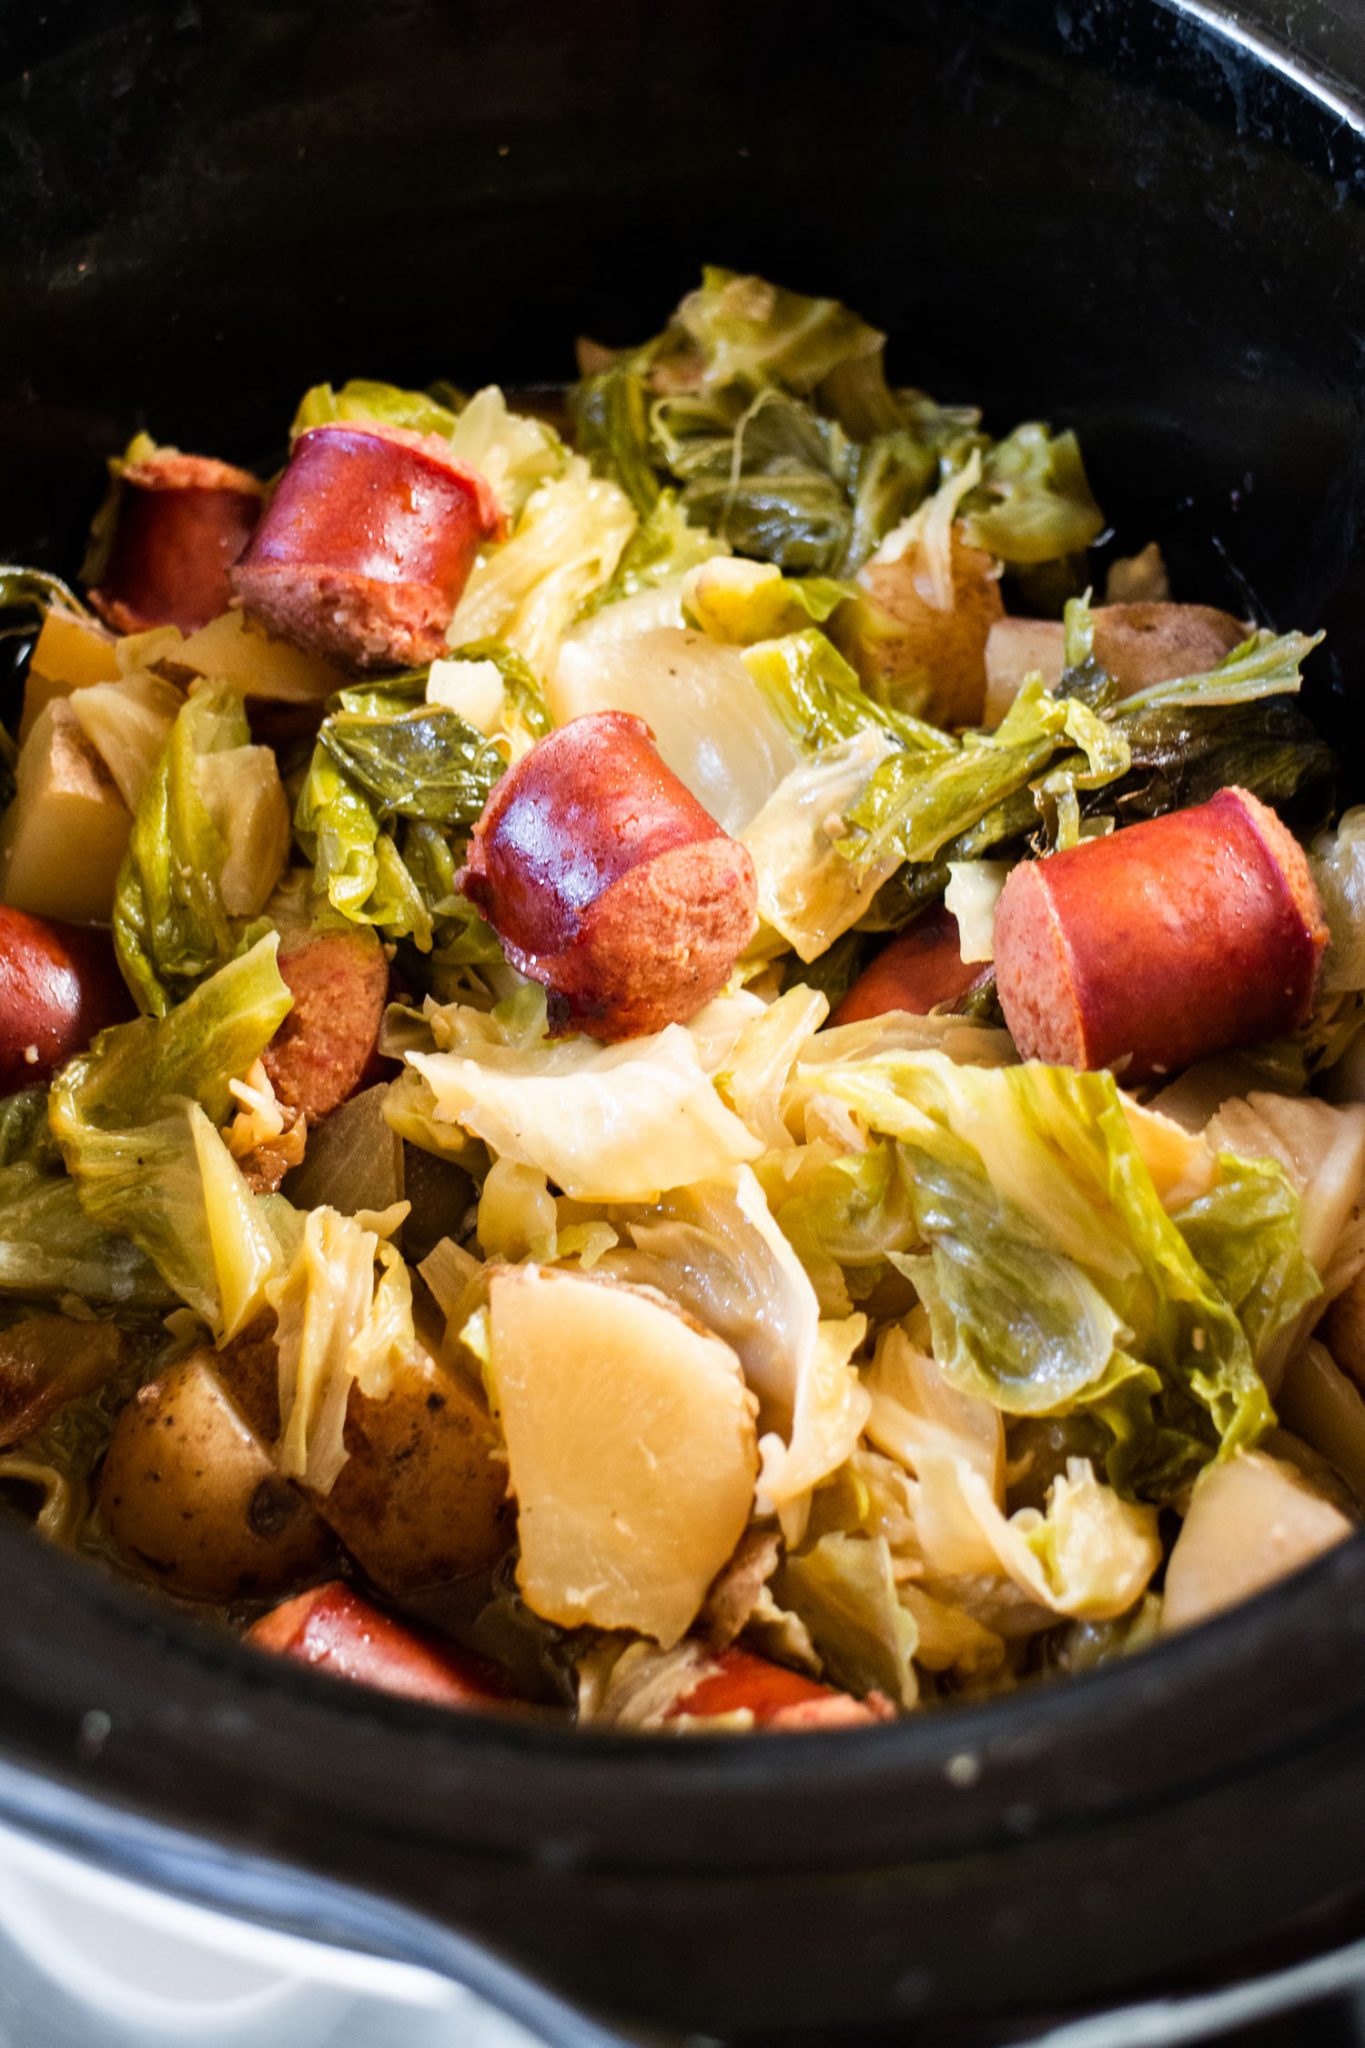 Slow Cooker Kielbasa and Cabbage Recipe - Easy Crockpot Meal!